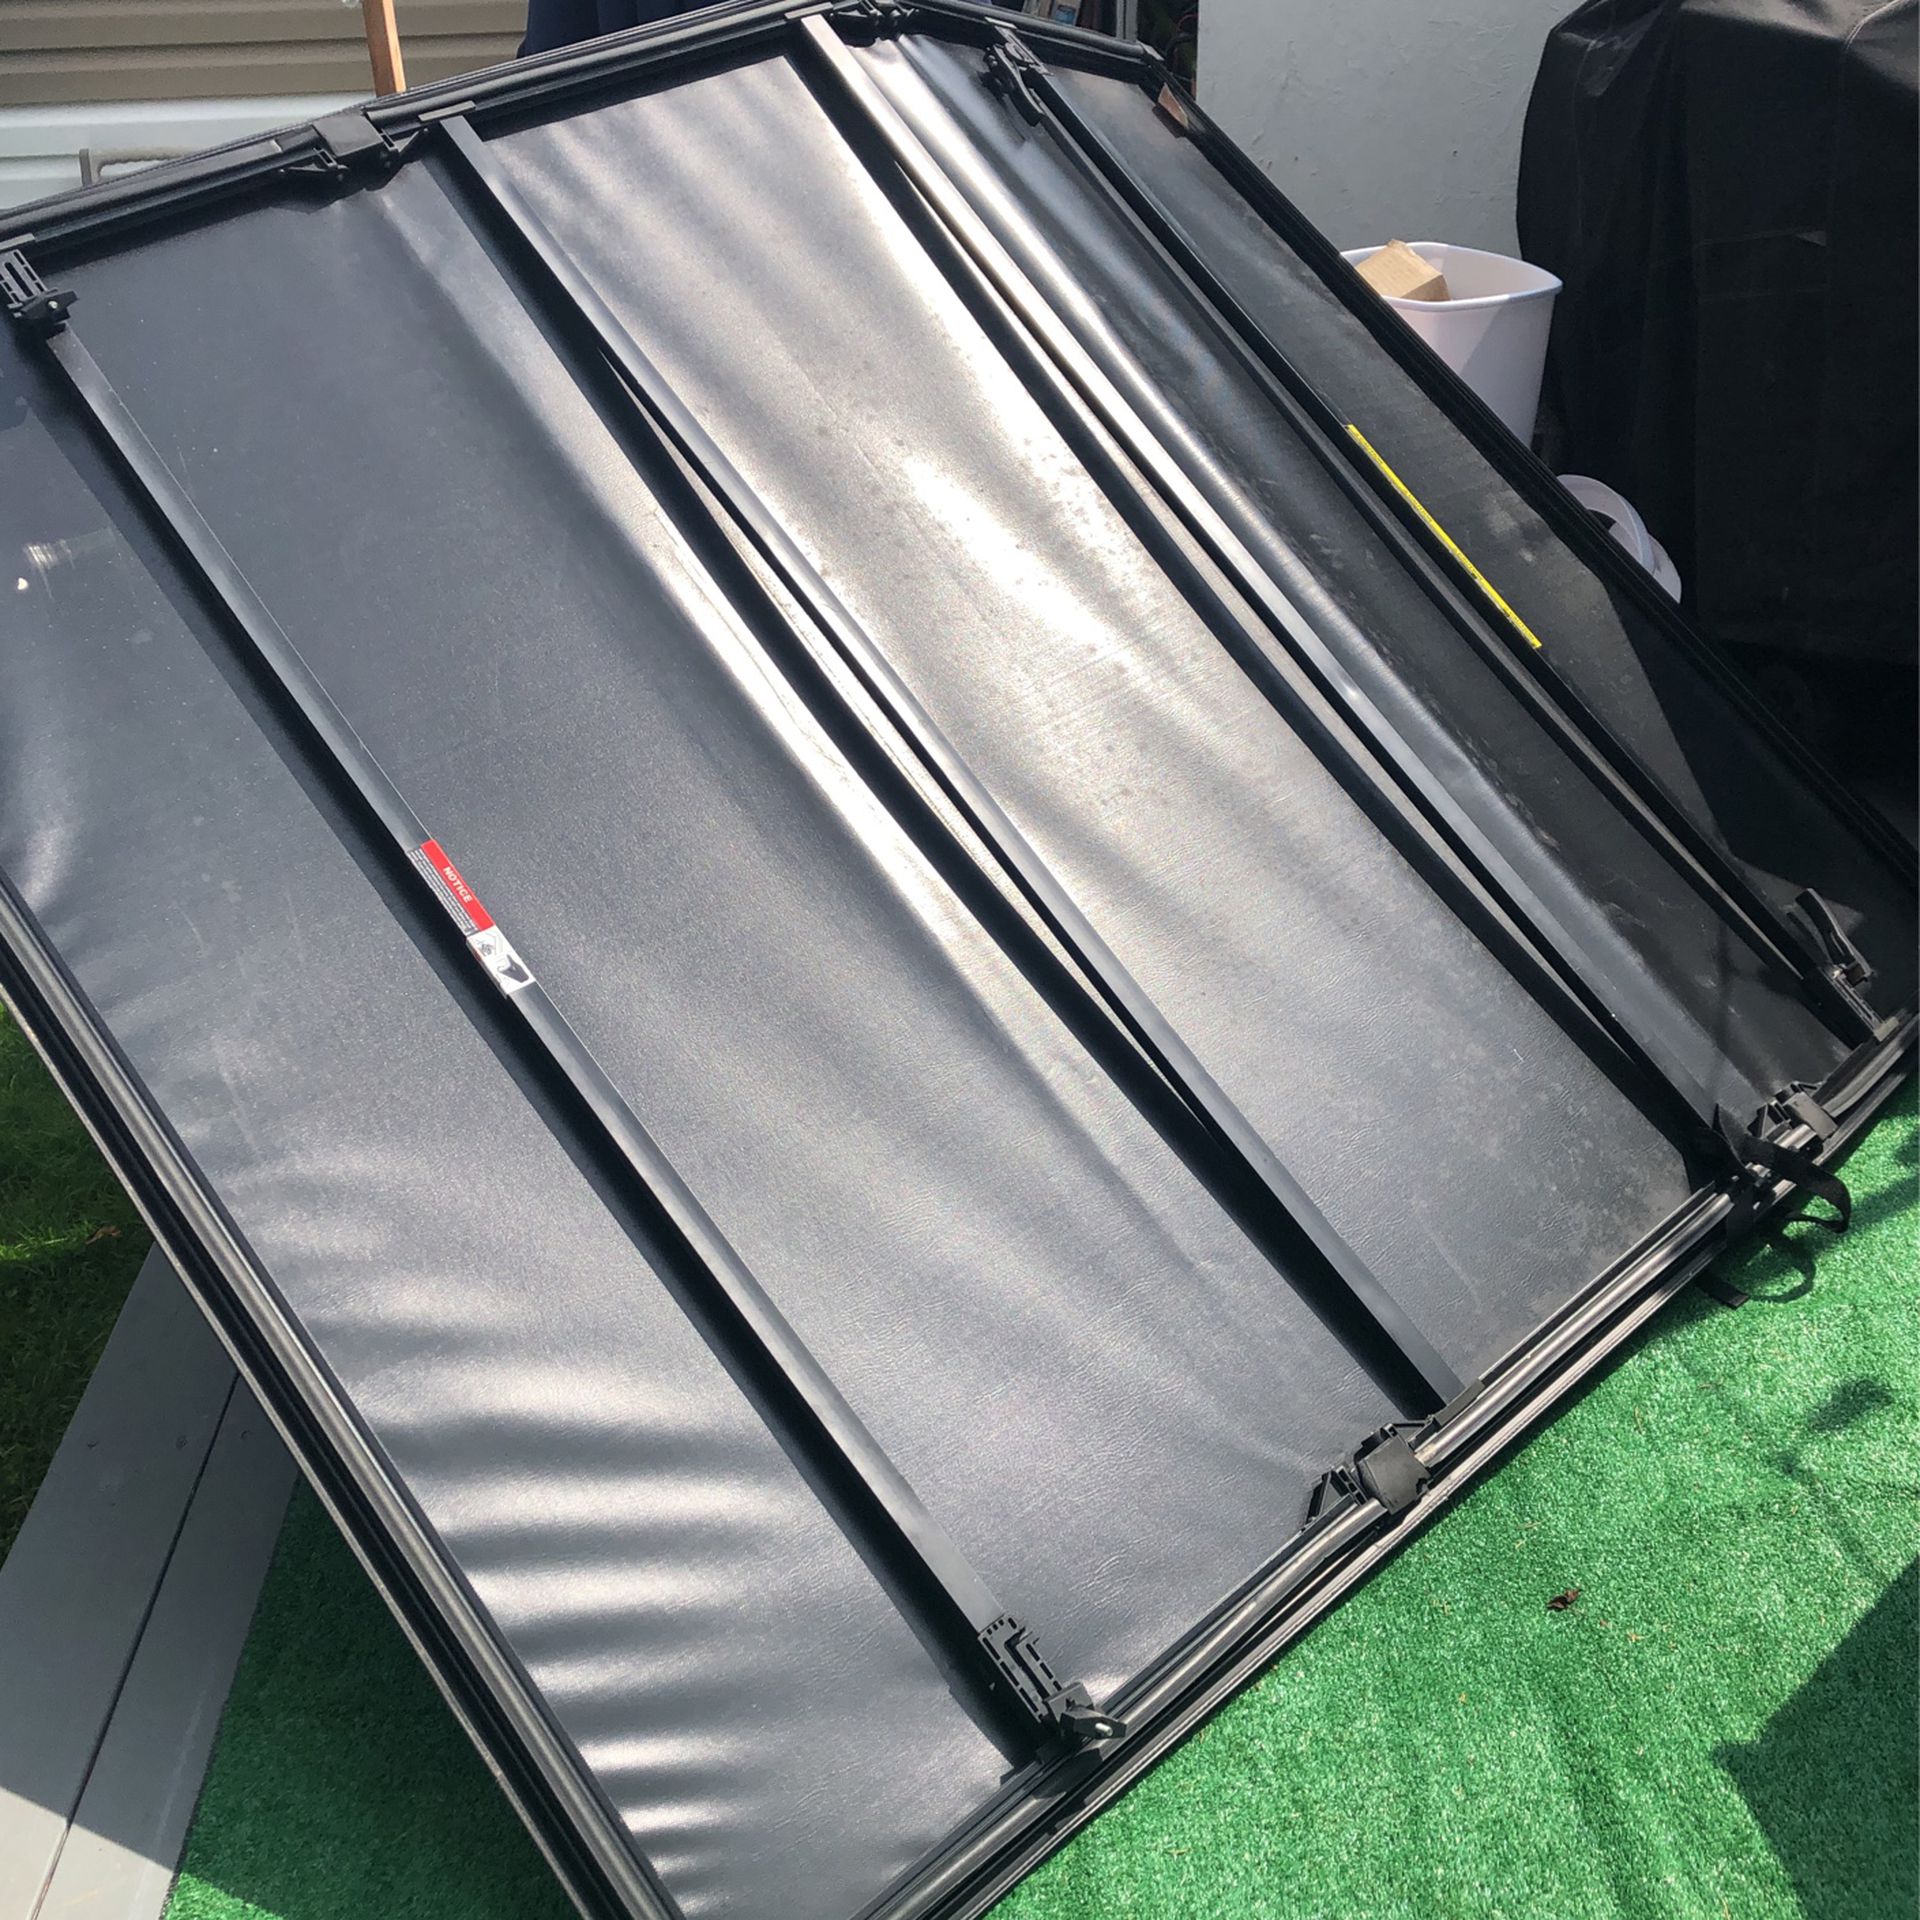 Pick up truck bed cover